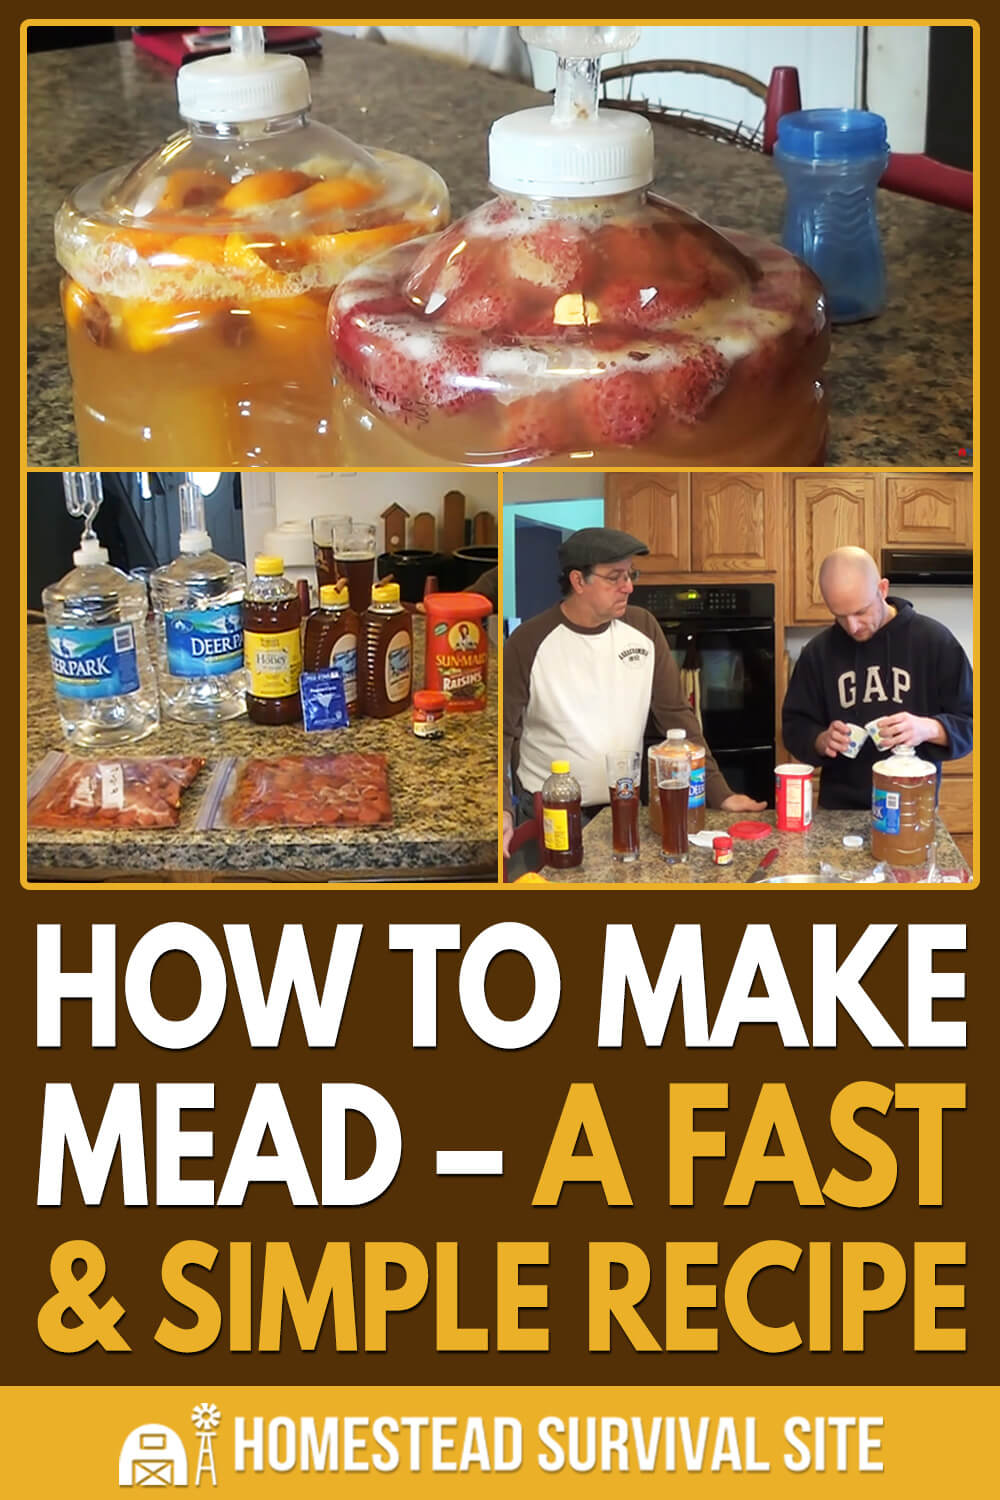 How To Make Mead - A Fast & Simple Recipe